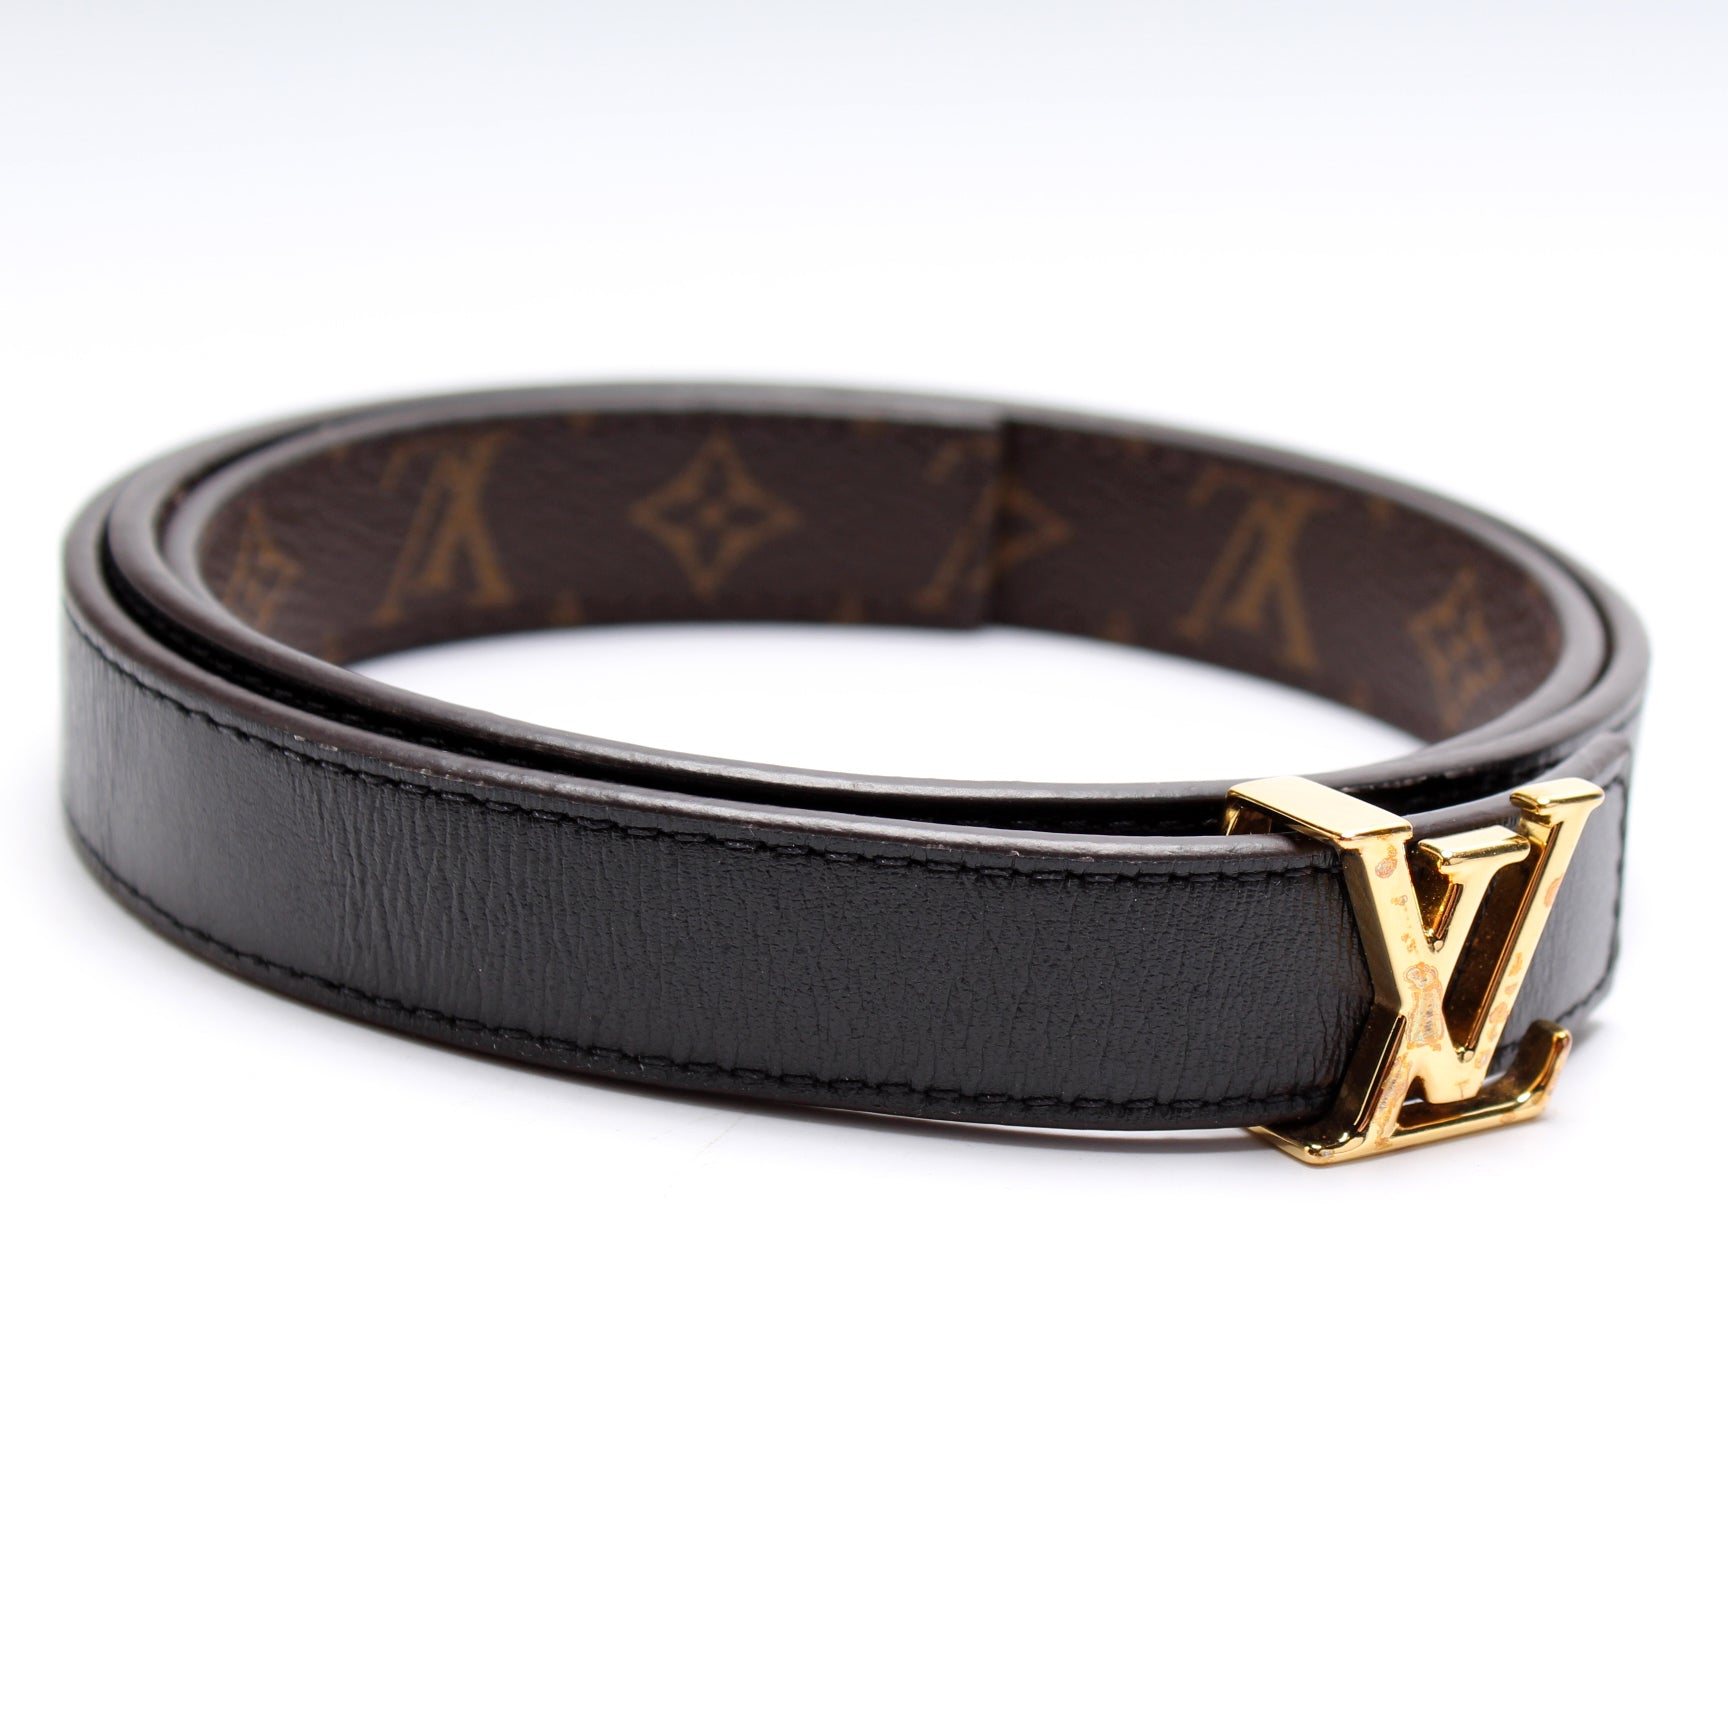 Louis Vuitton LV iconic 20mm reversible belt in monogram and black